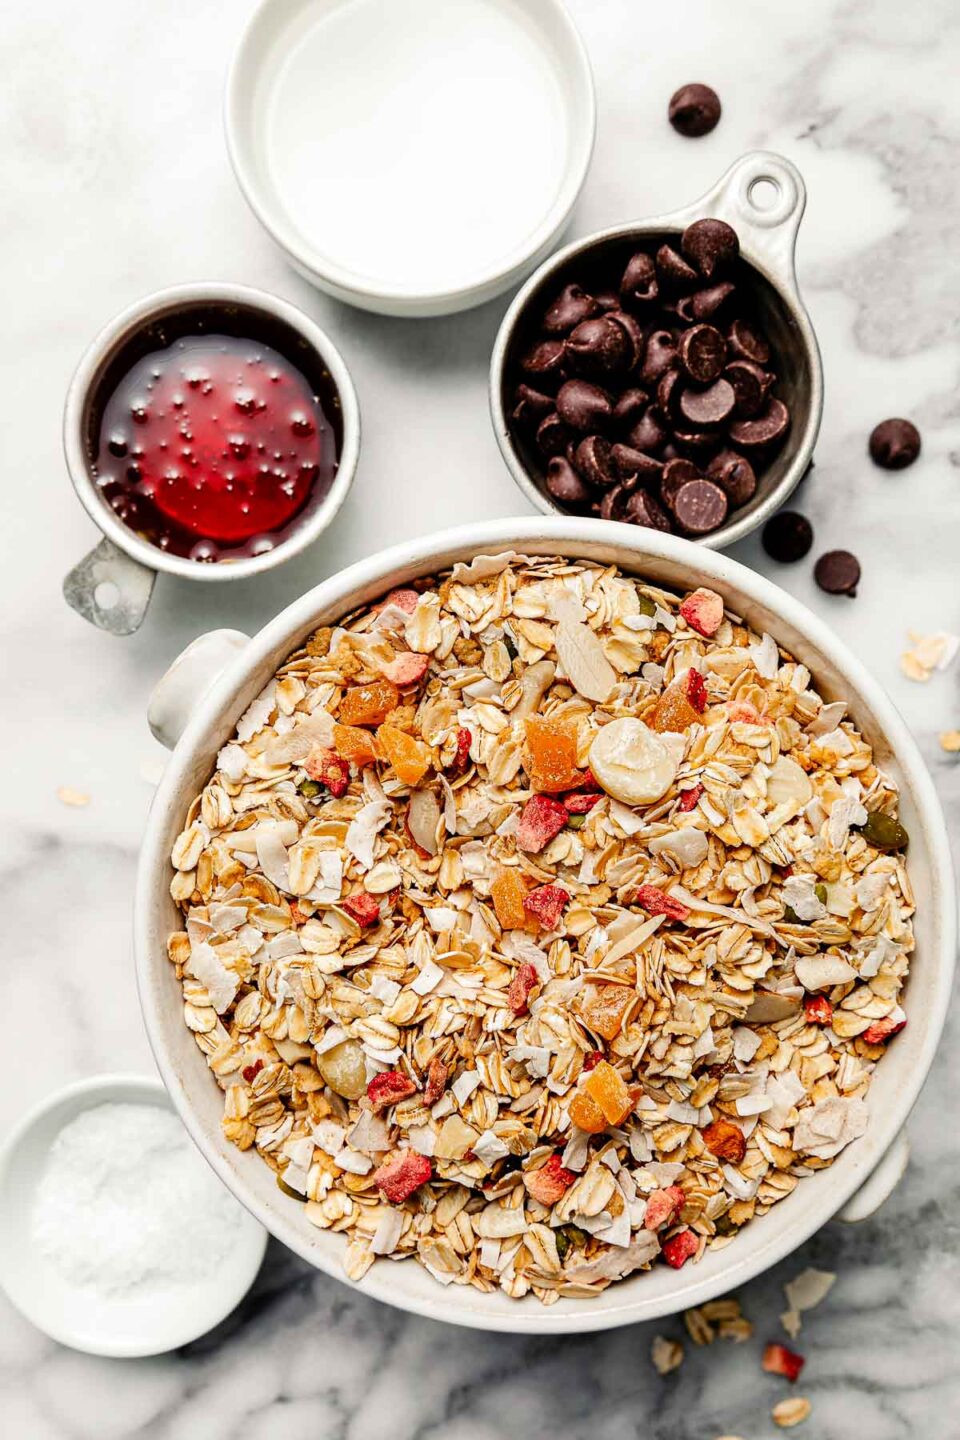 Ingredients are displayed in white bowls atop a white and grey marbled surface: dry muesli, salt, melted coconut oil, chocolate chips, and maple syrup.